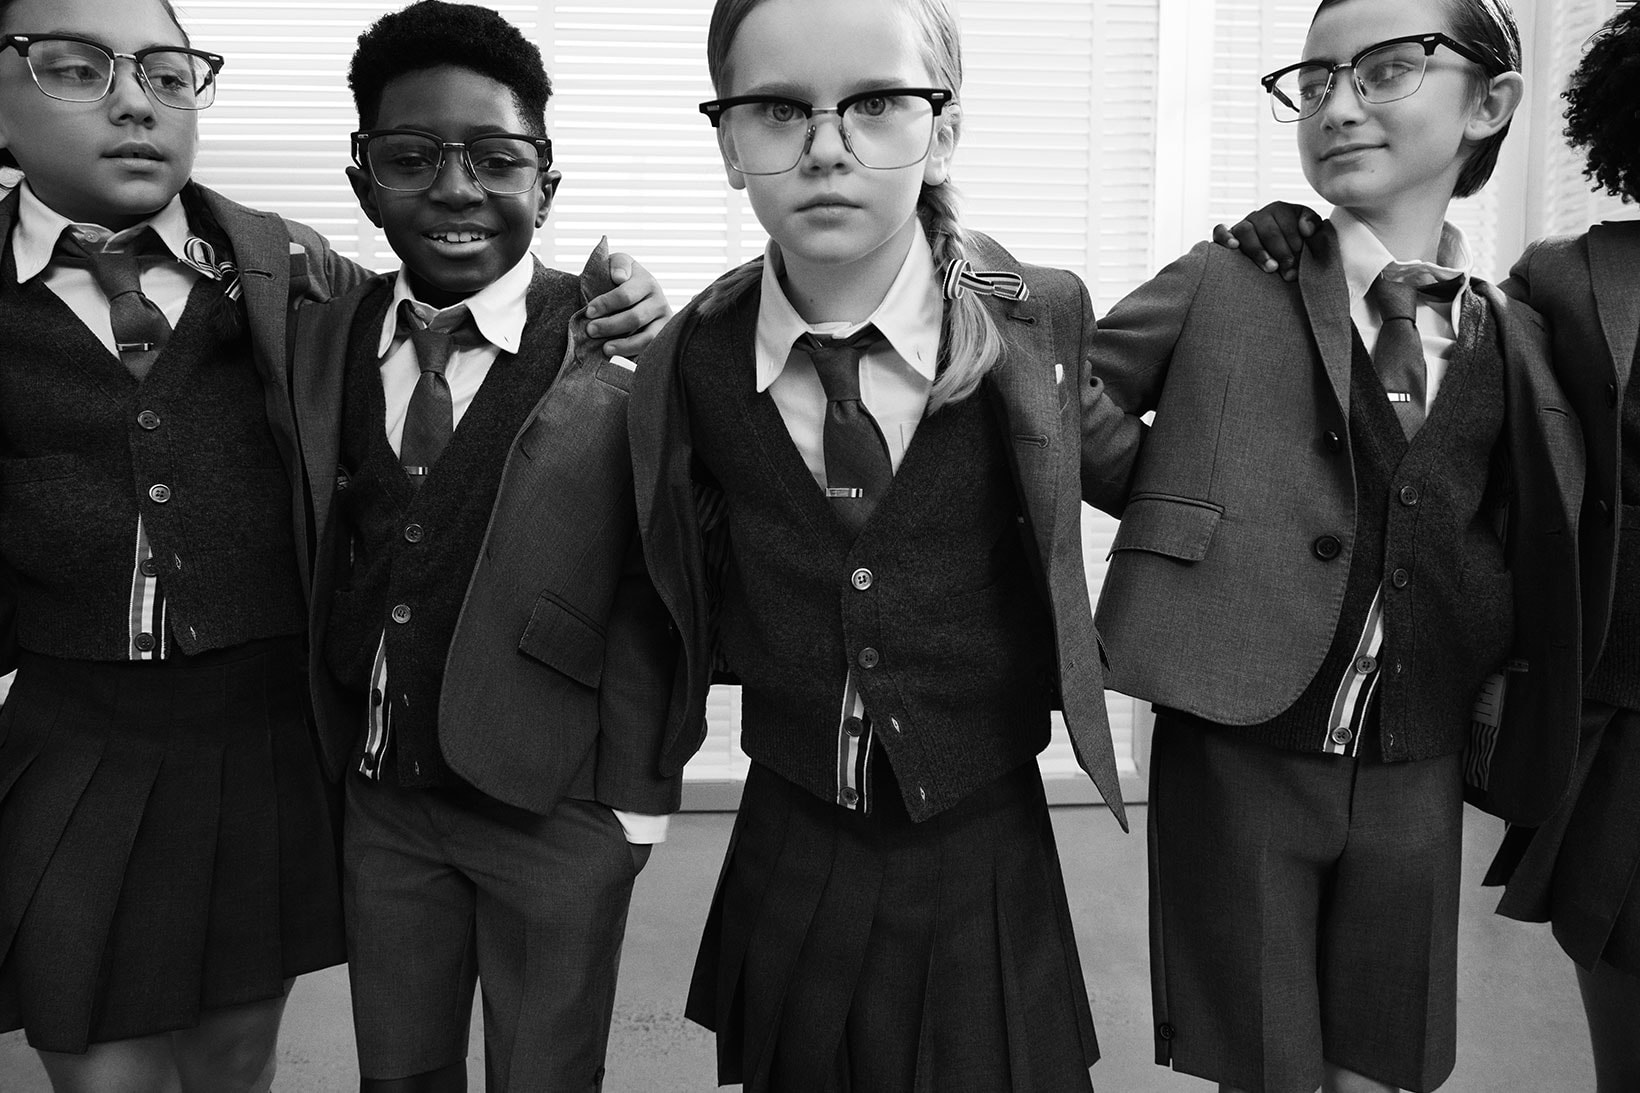 thom browne childrenswear kids line launch campaign school uniform blazers jackets pleated skirts group students glasses friends